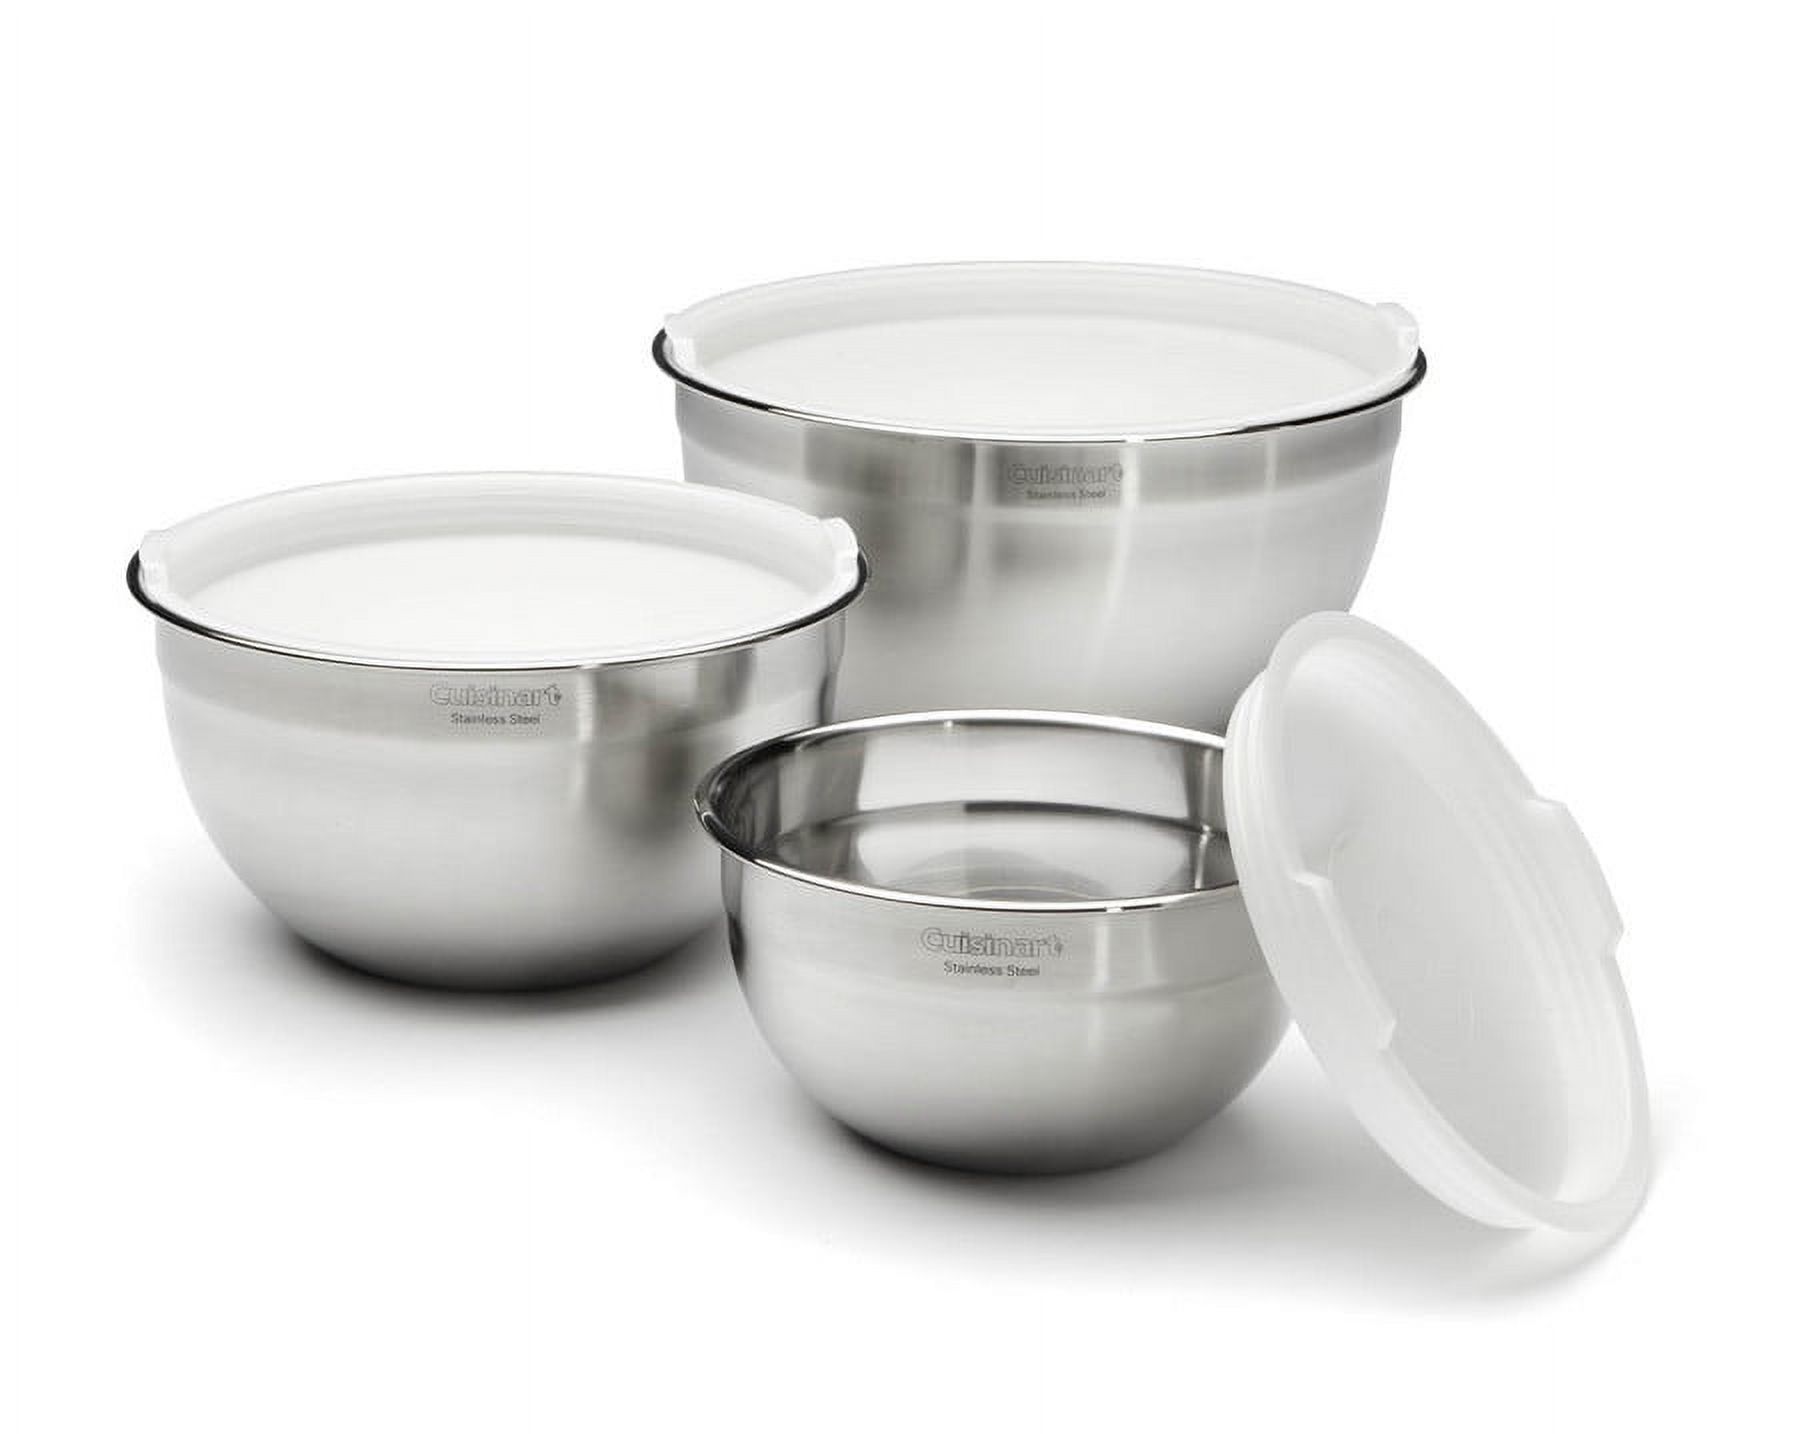 Cuisinart Non-Handled Stainless Steel Mixing Bowls with Lids - image 1 of 2